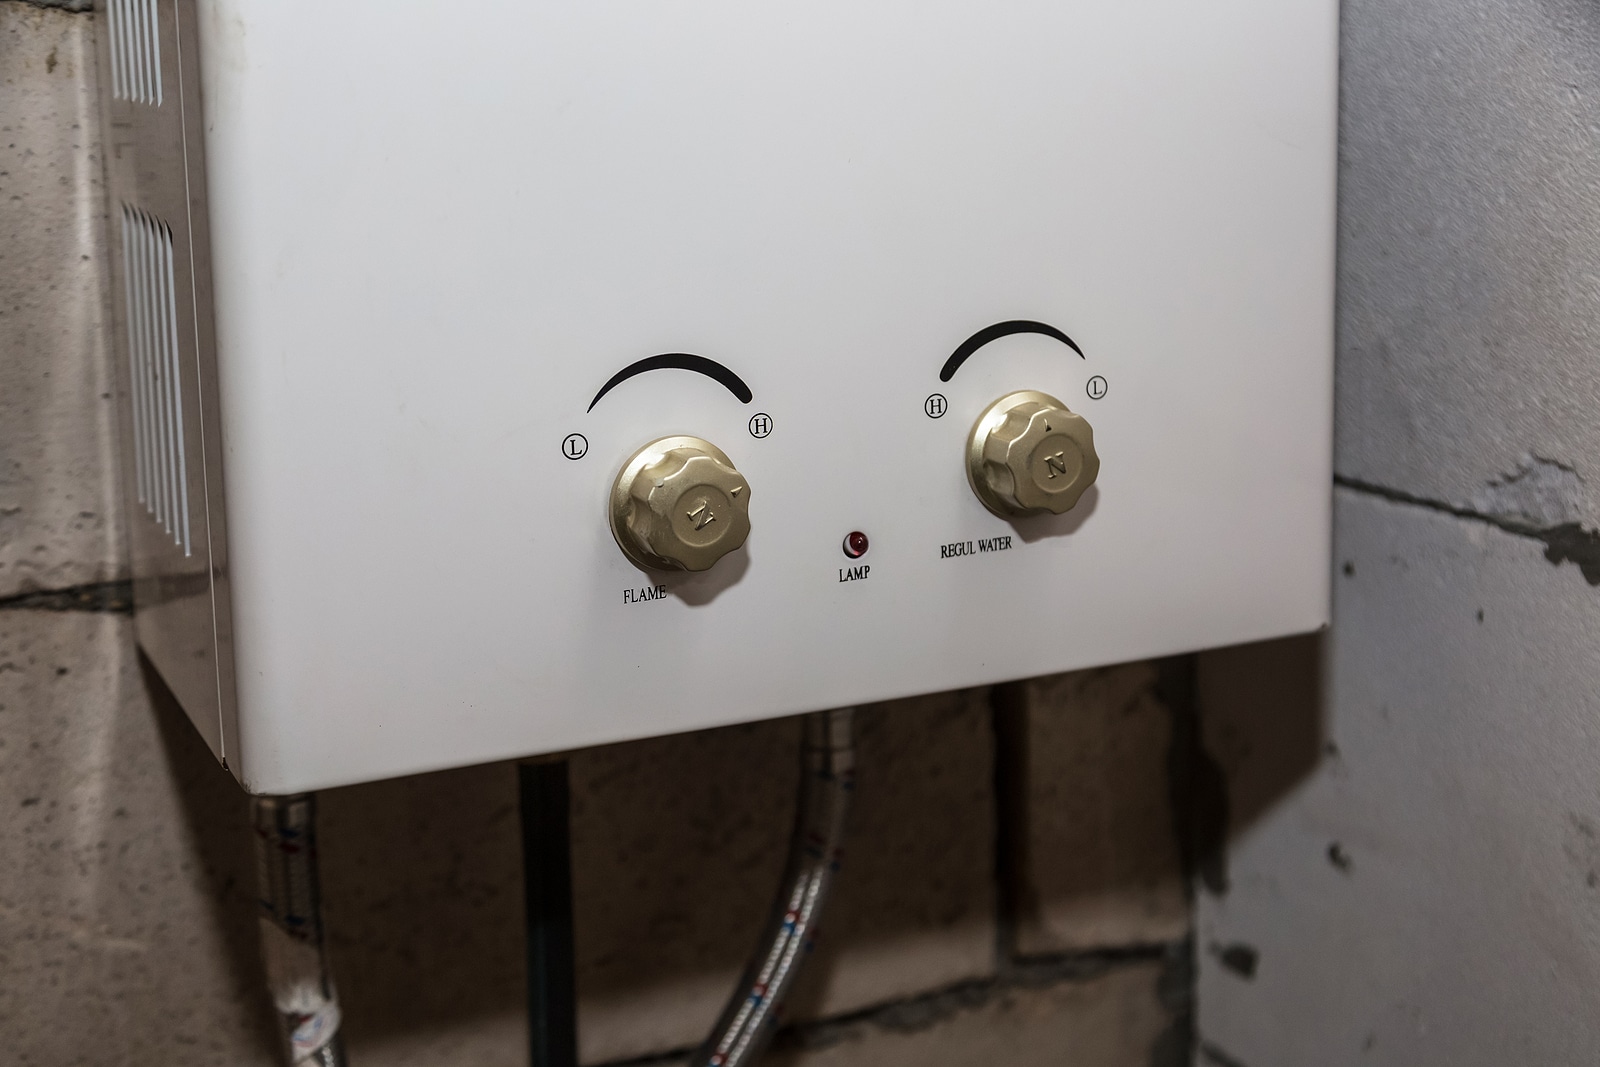 The Lifespan of a Water Heater: Knowing When to Plan For Replacement